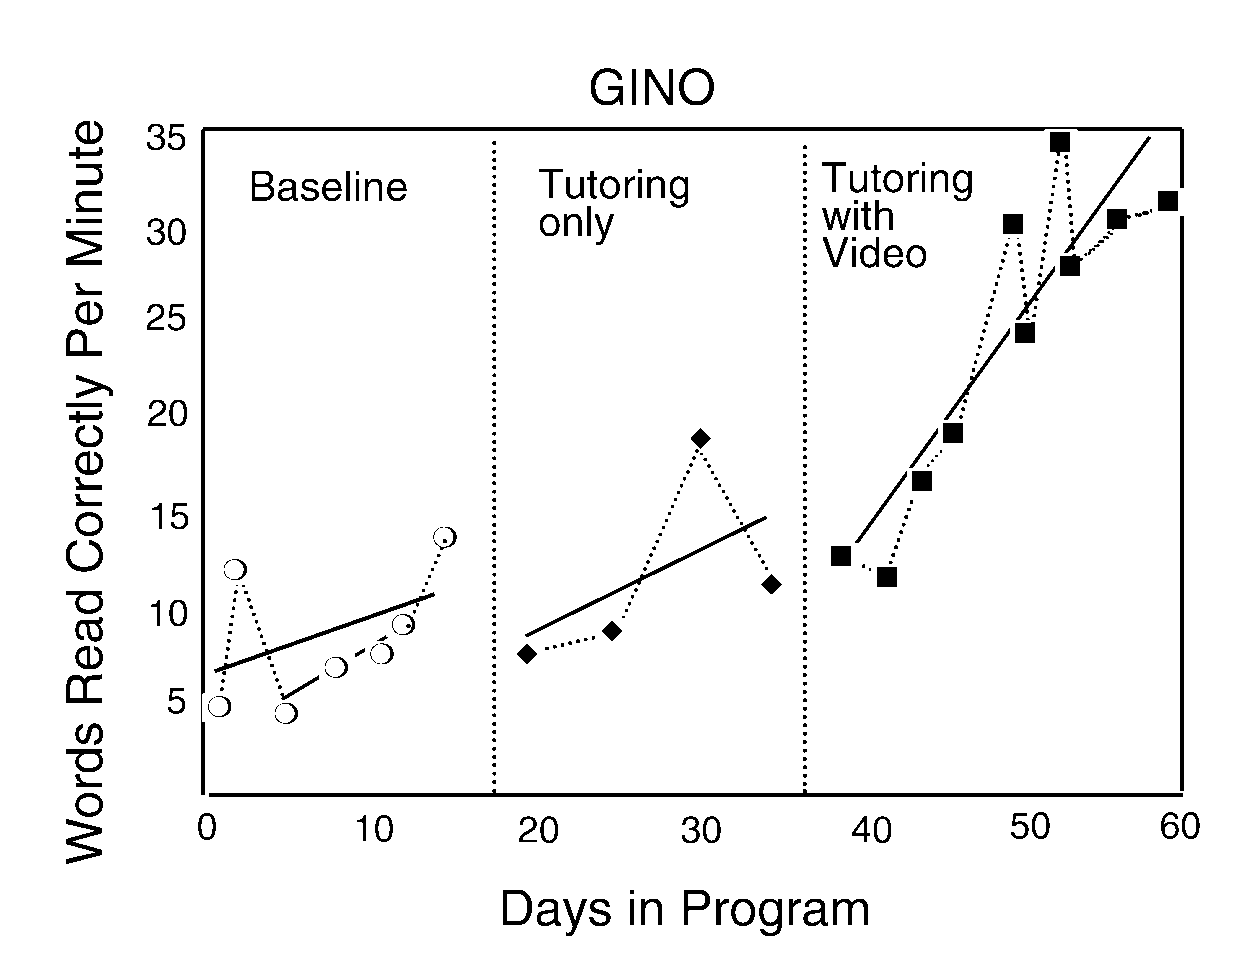 Chart showing Gino's reading progress over time